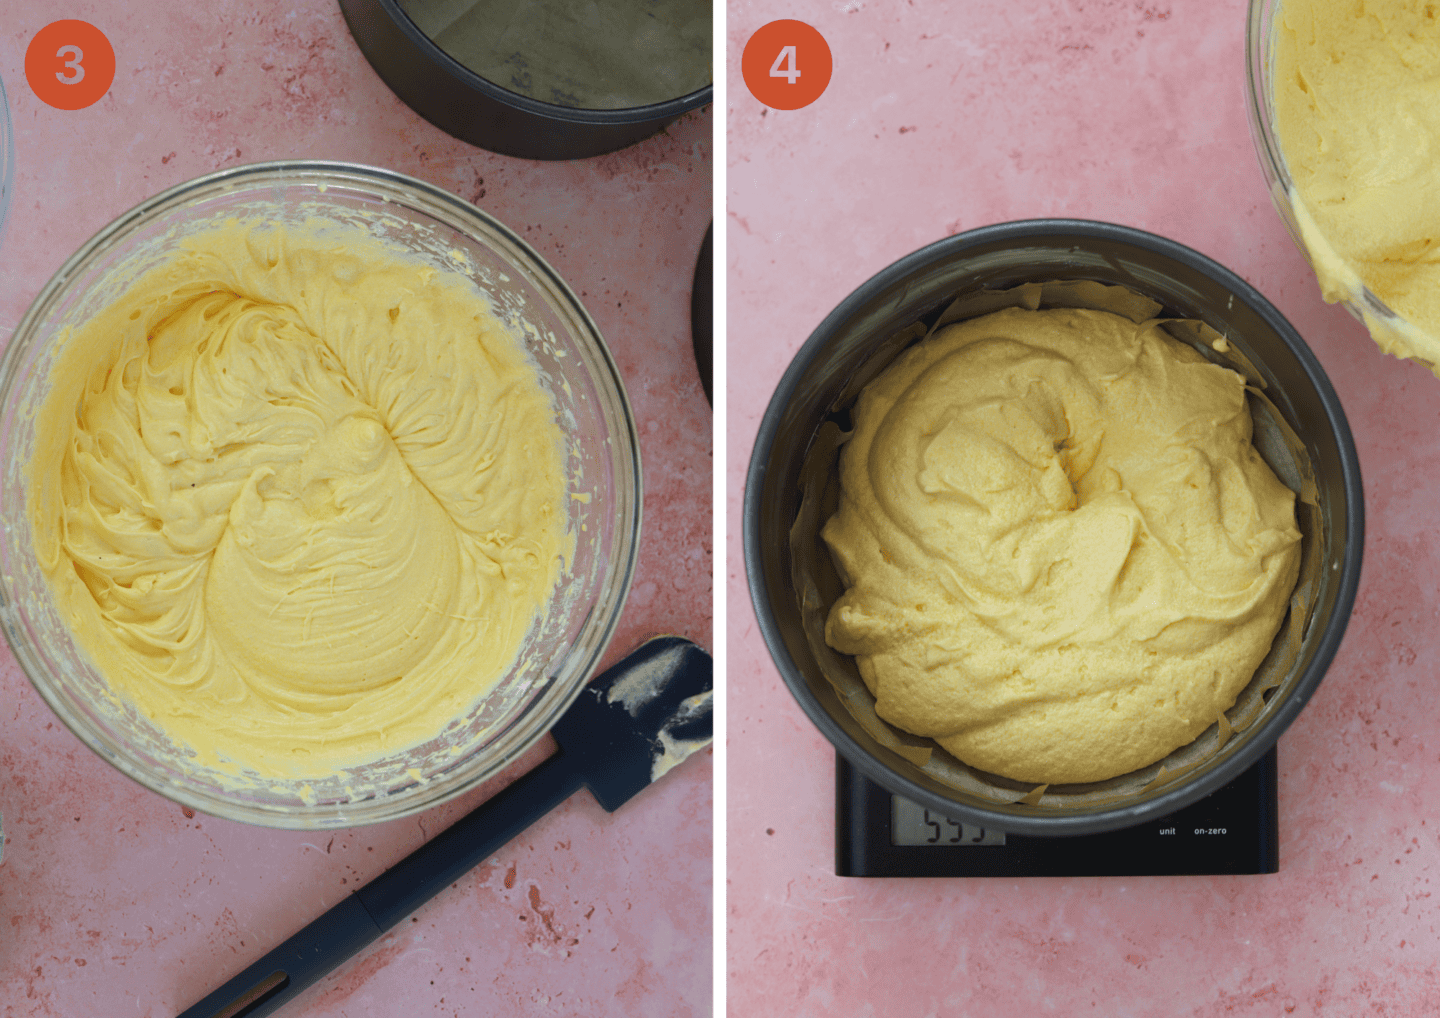 Mix in the eggs and flour and then pour into the cake tins.